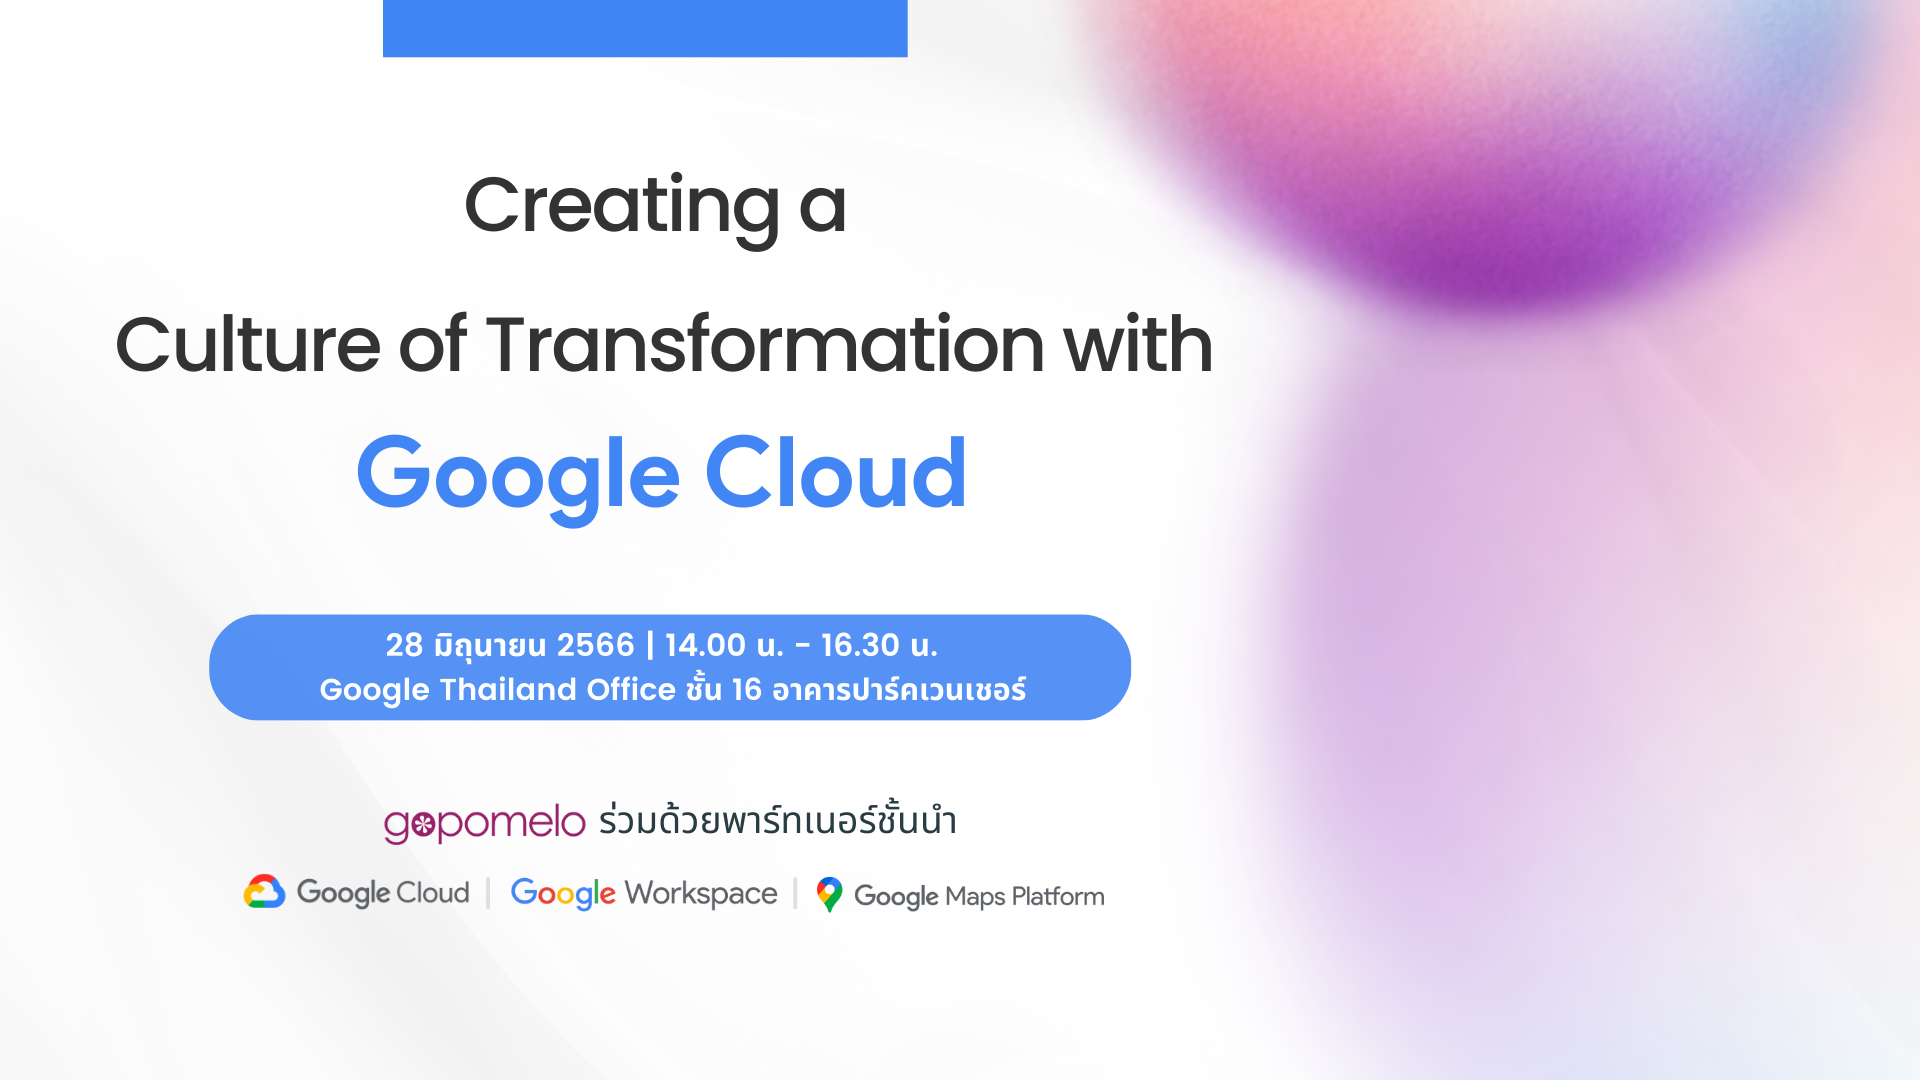 Creating a Culture of Transformation with Google Cloud